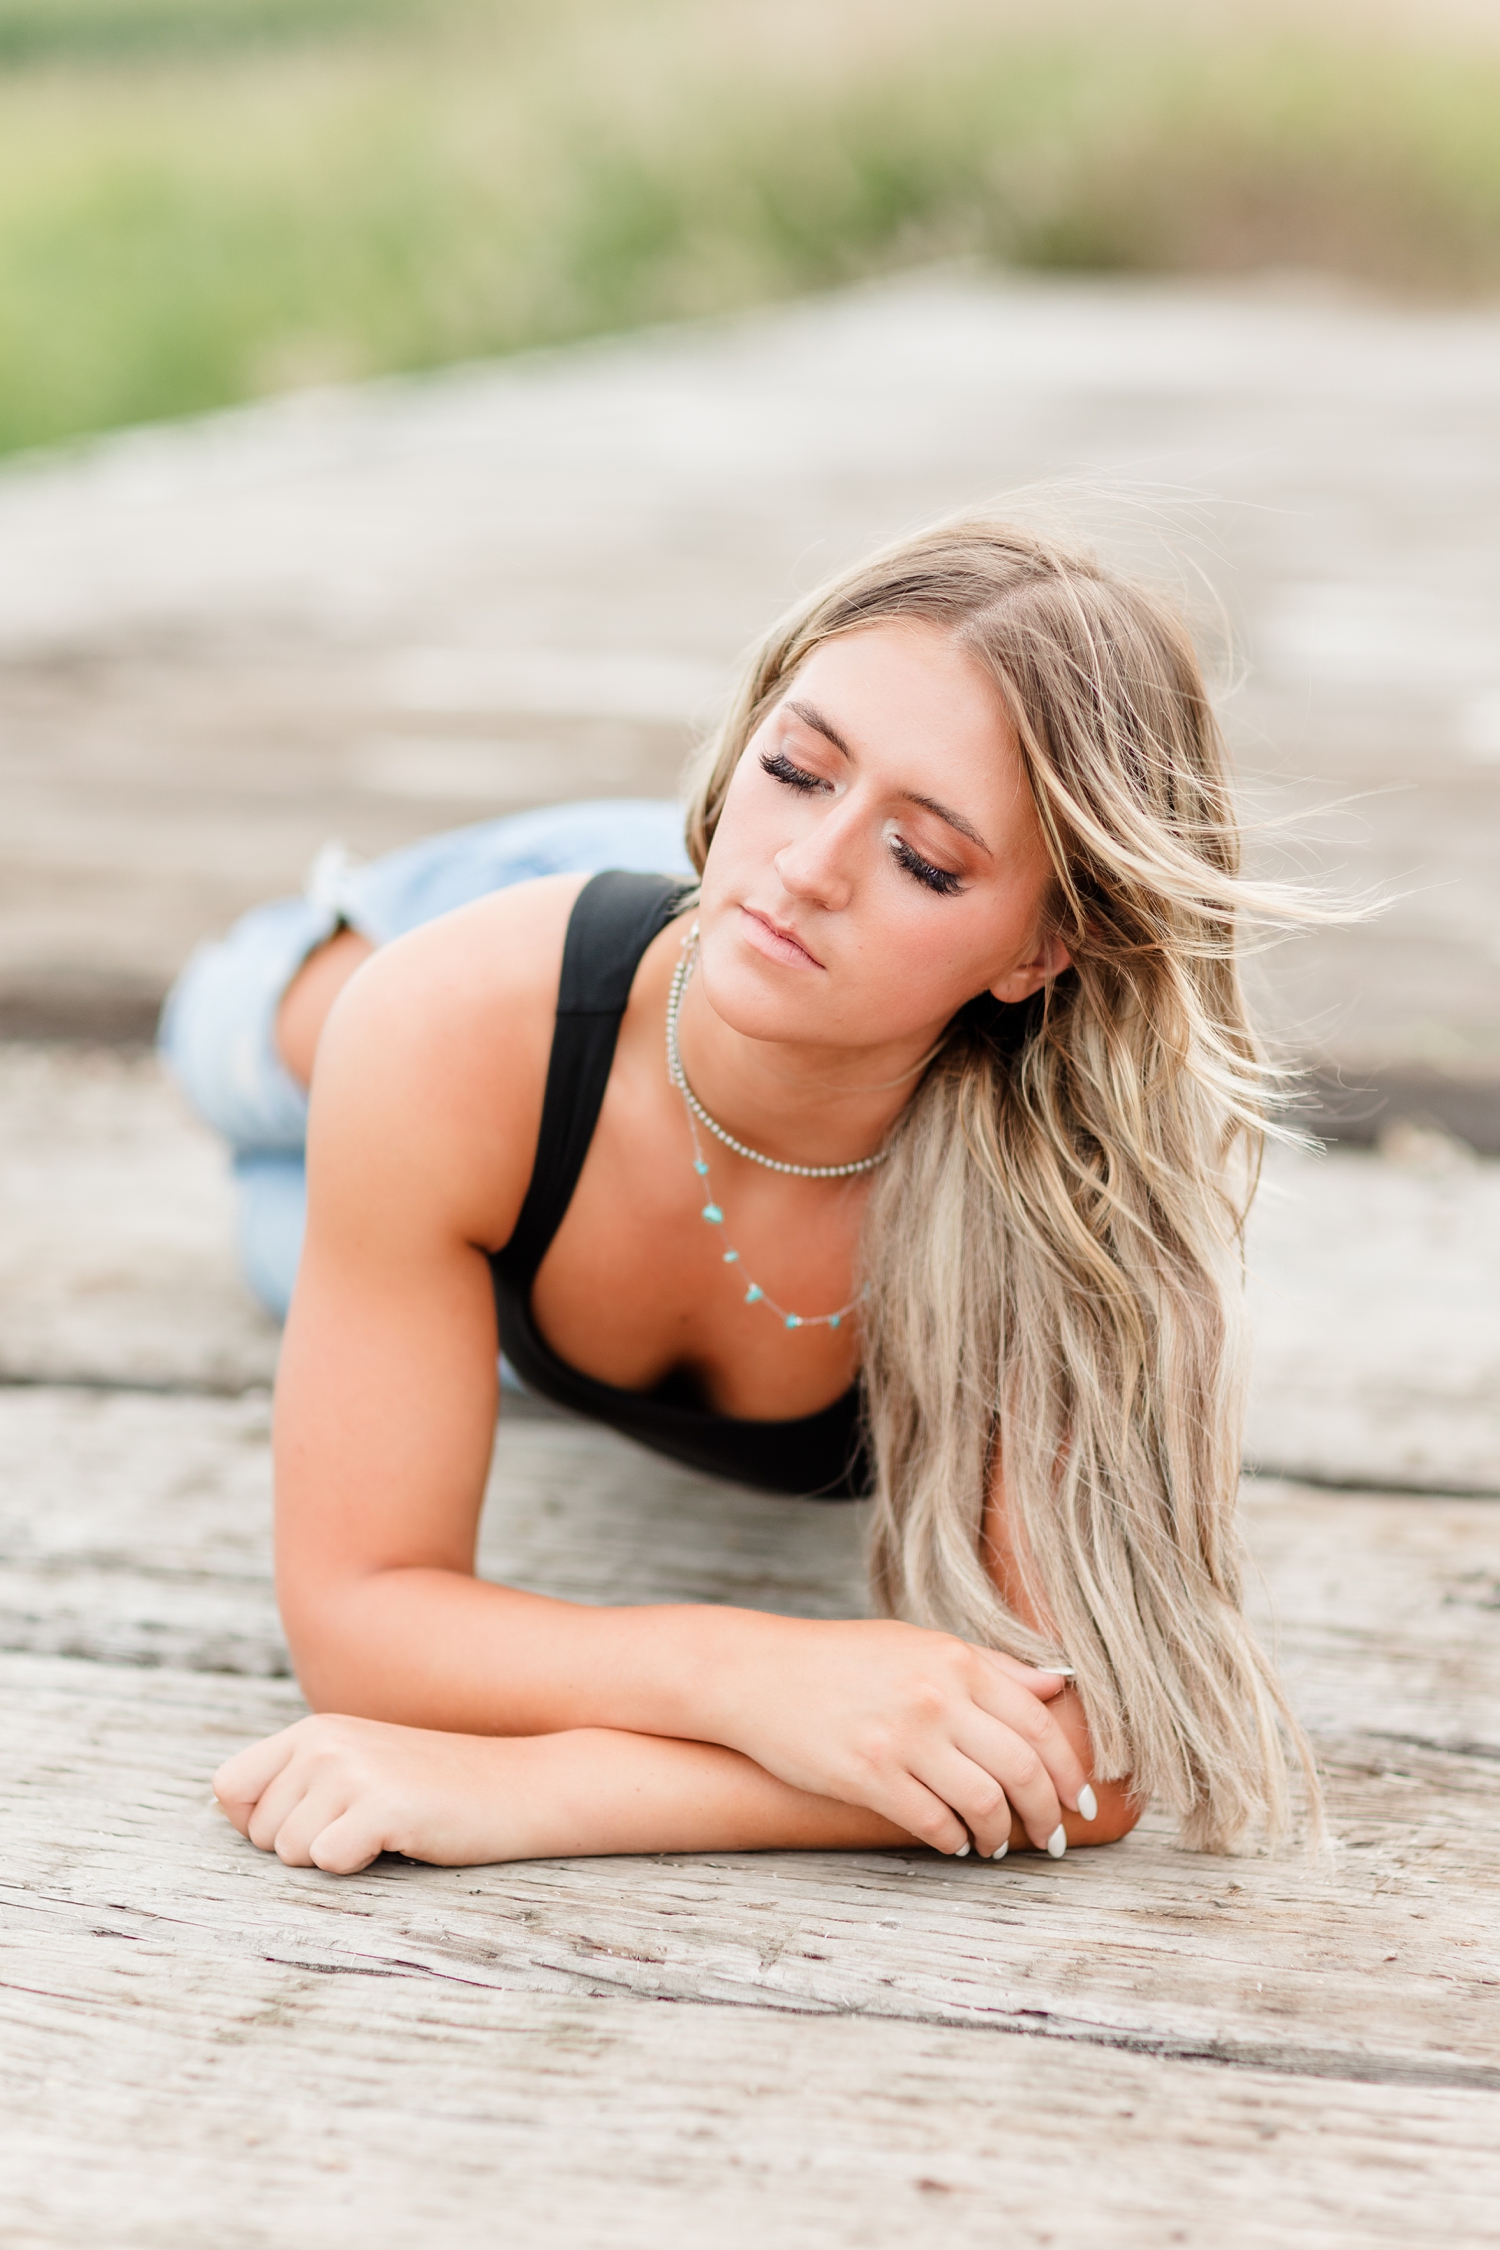 Jenna lays on an old wooden bridge as she closes her eyes and lets the wind blow through her hair | CB Studio